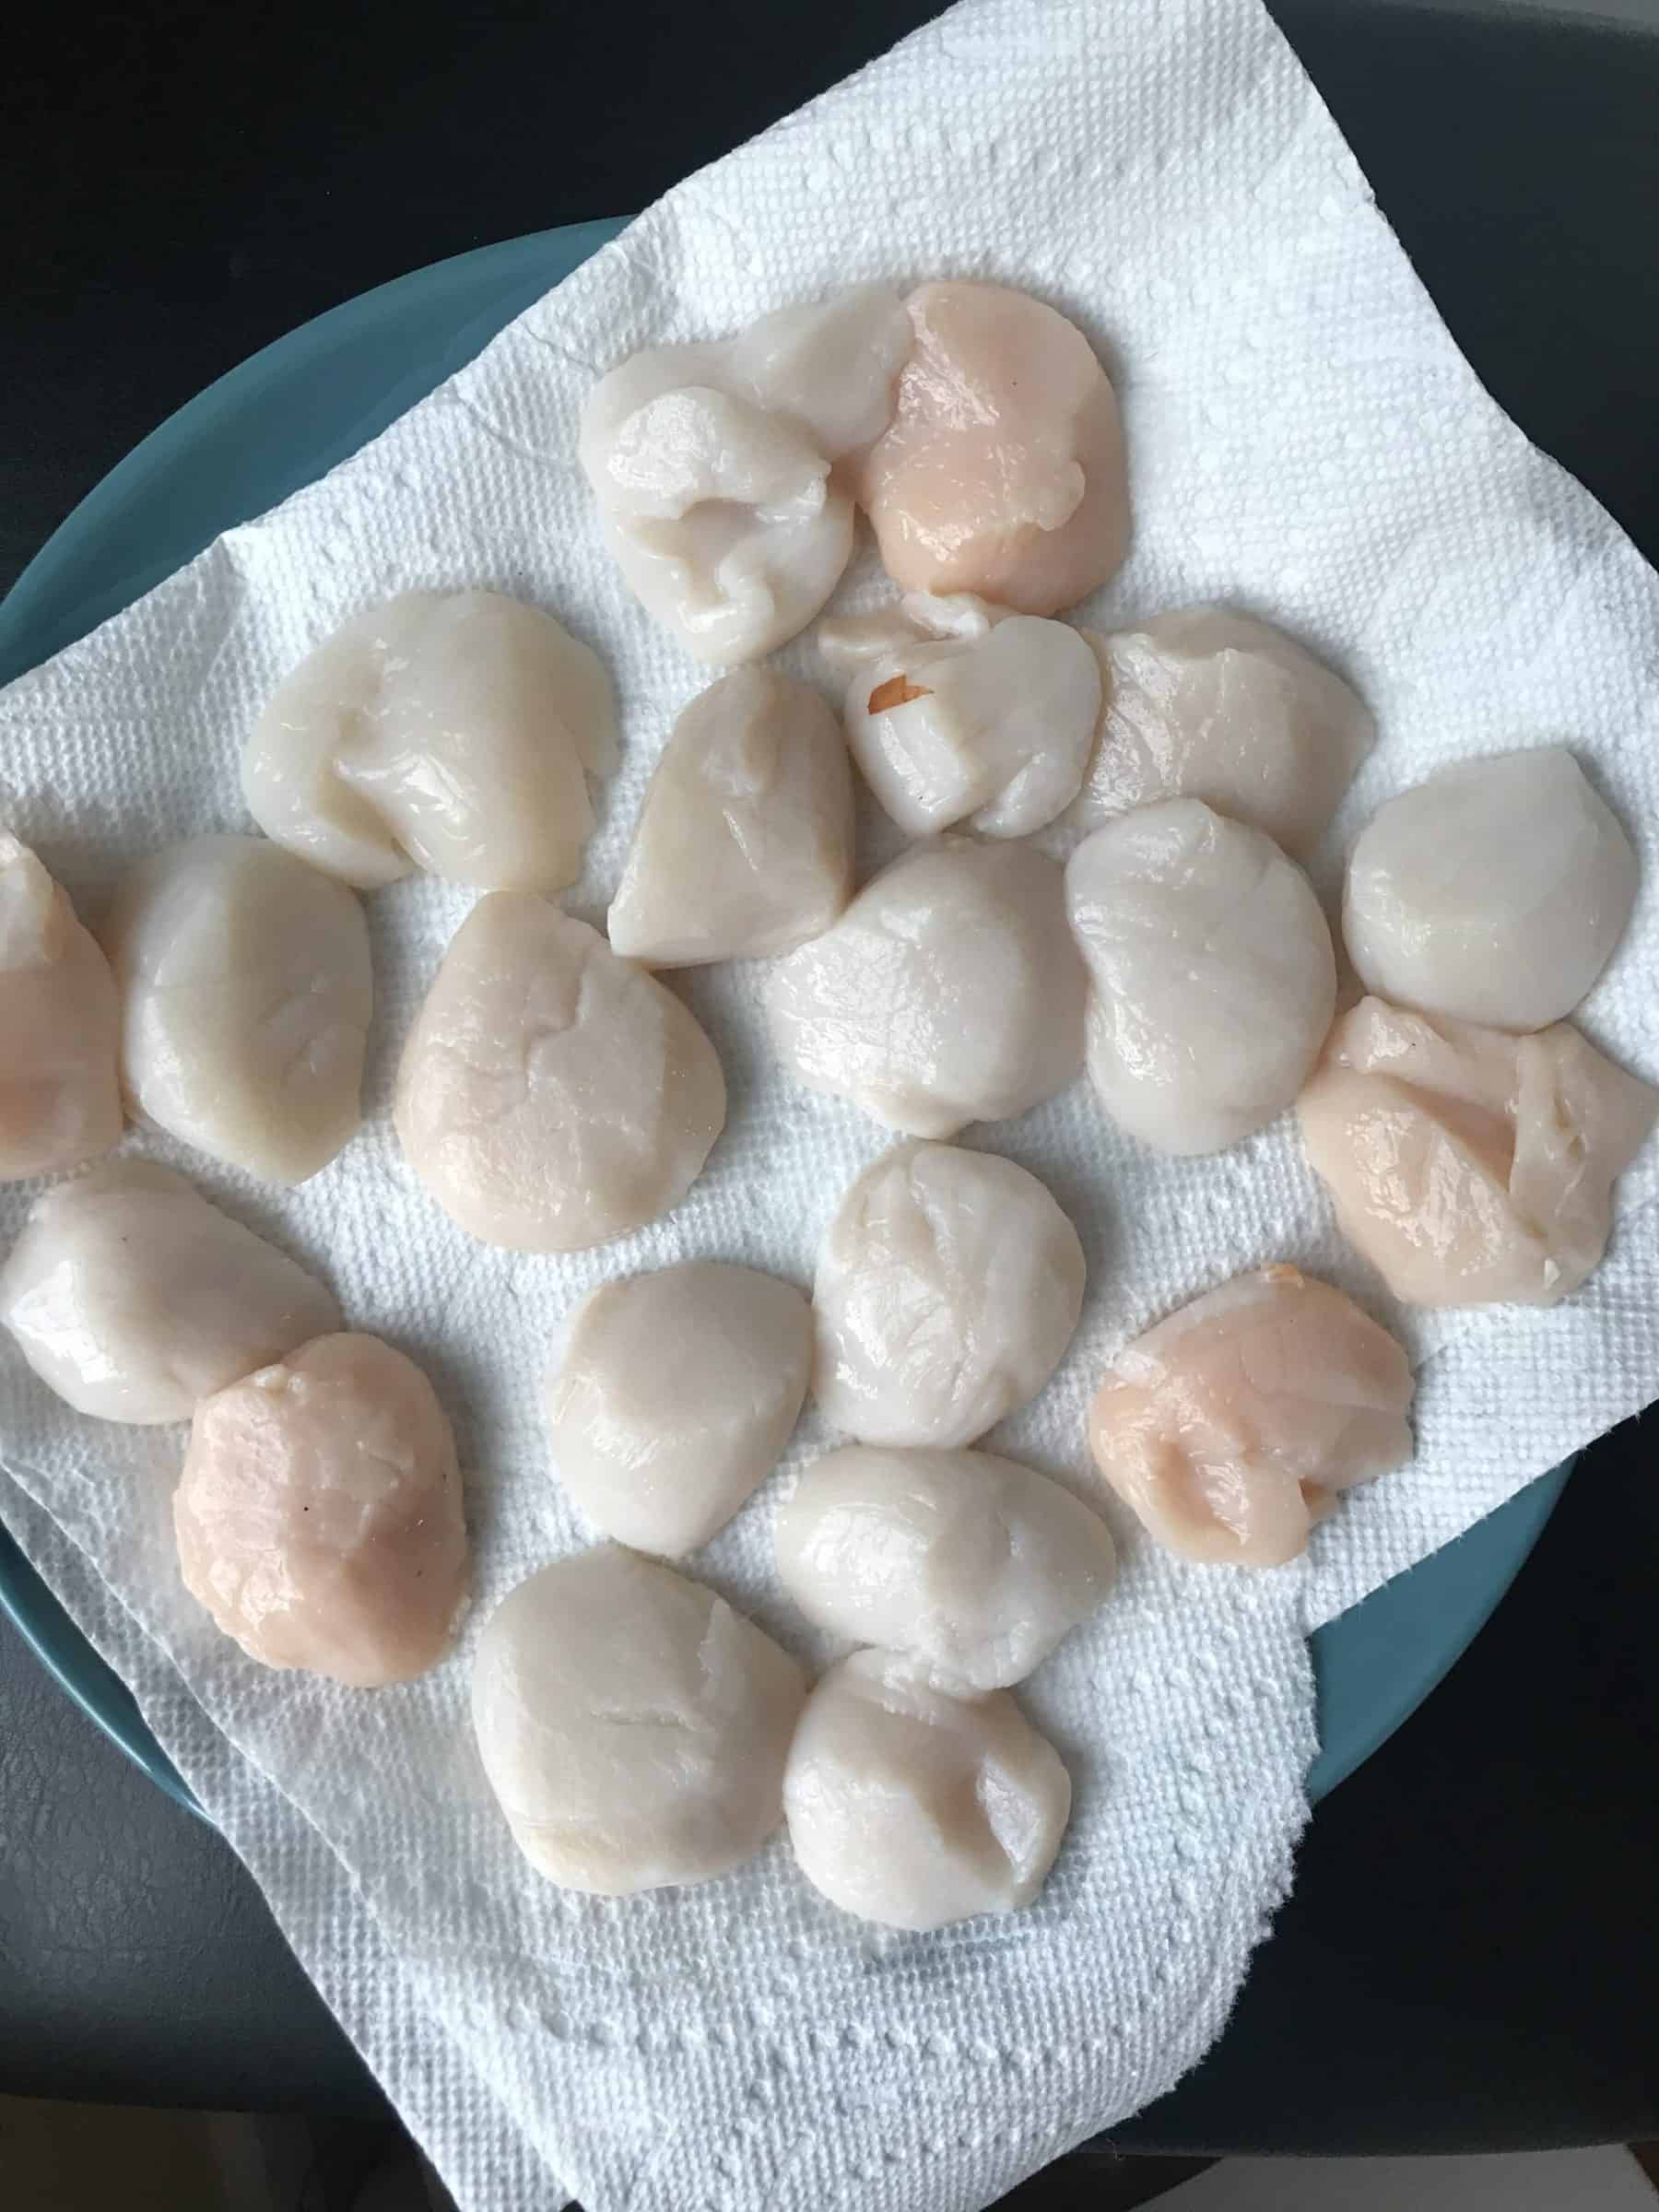 scallops ready to be cooked